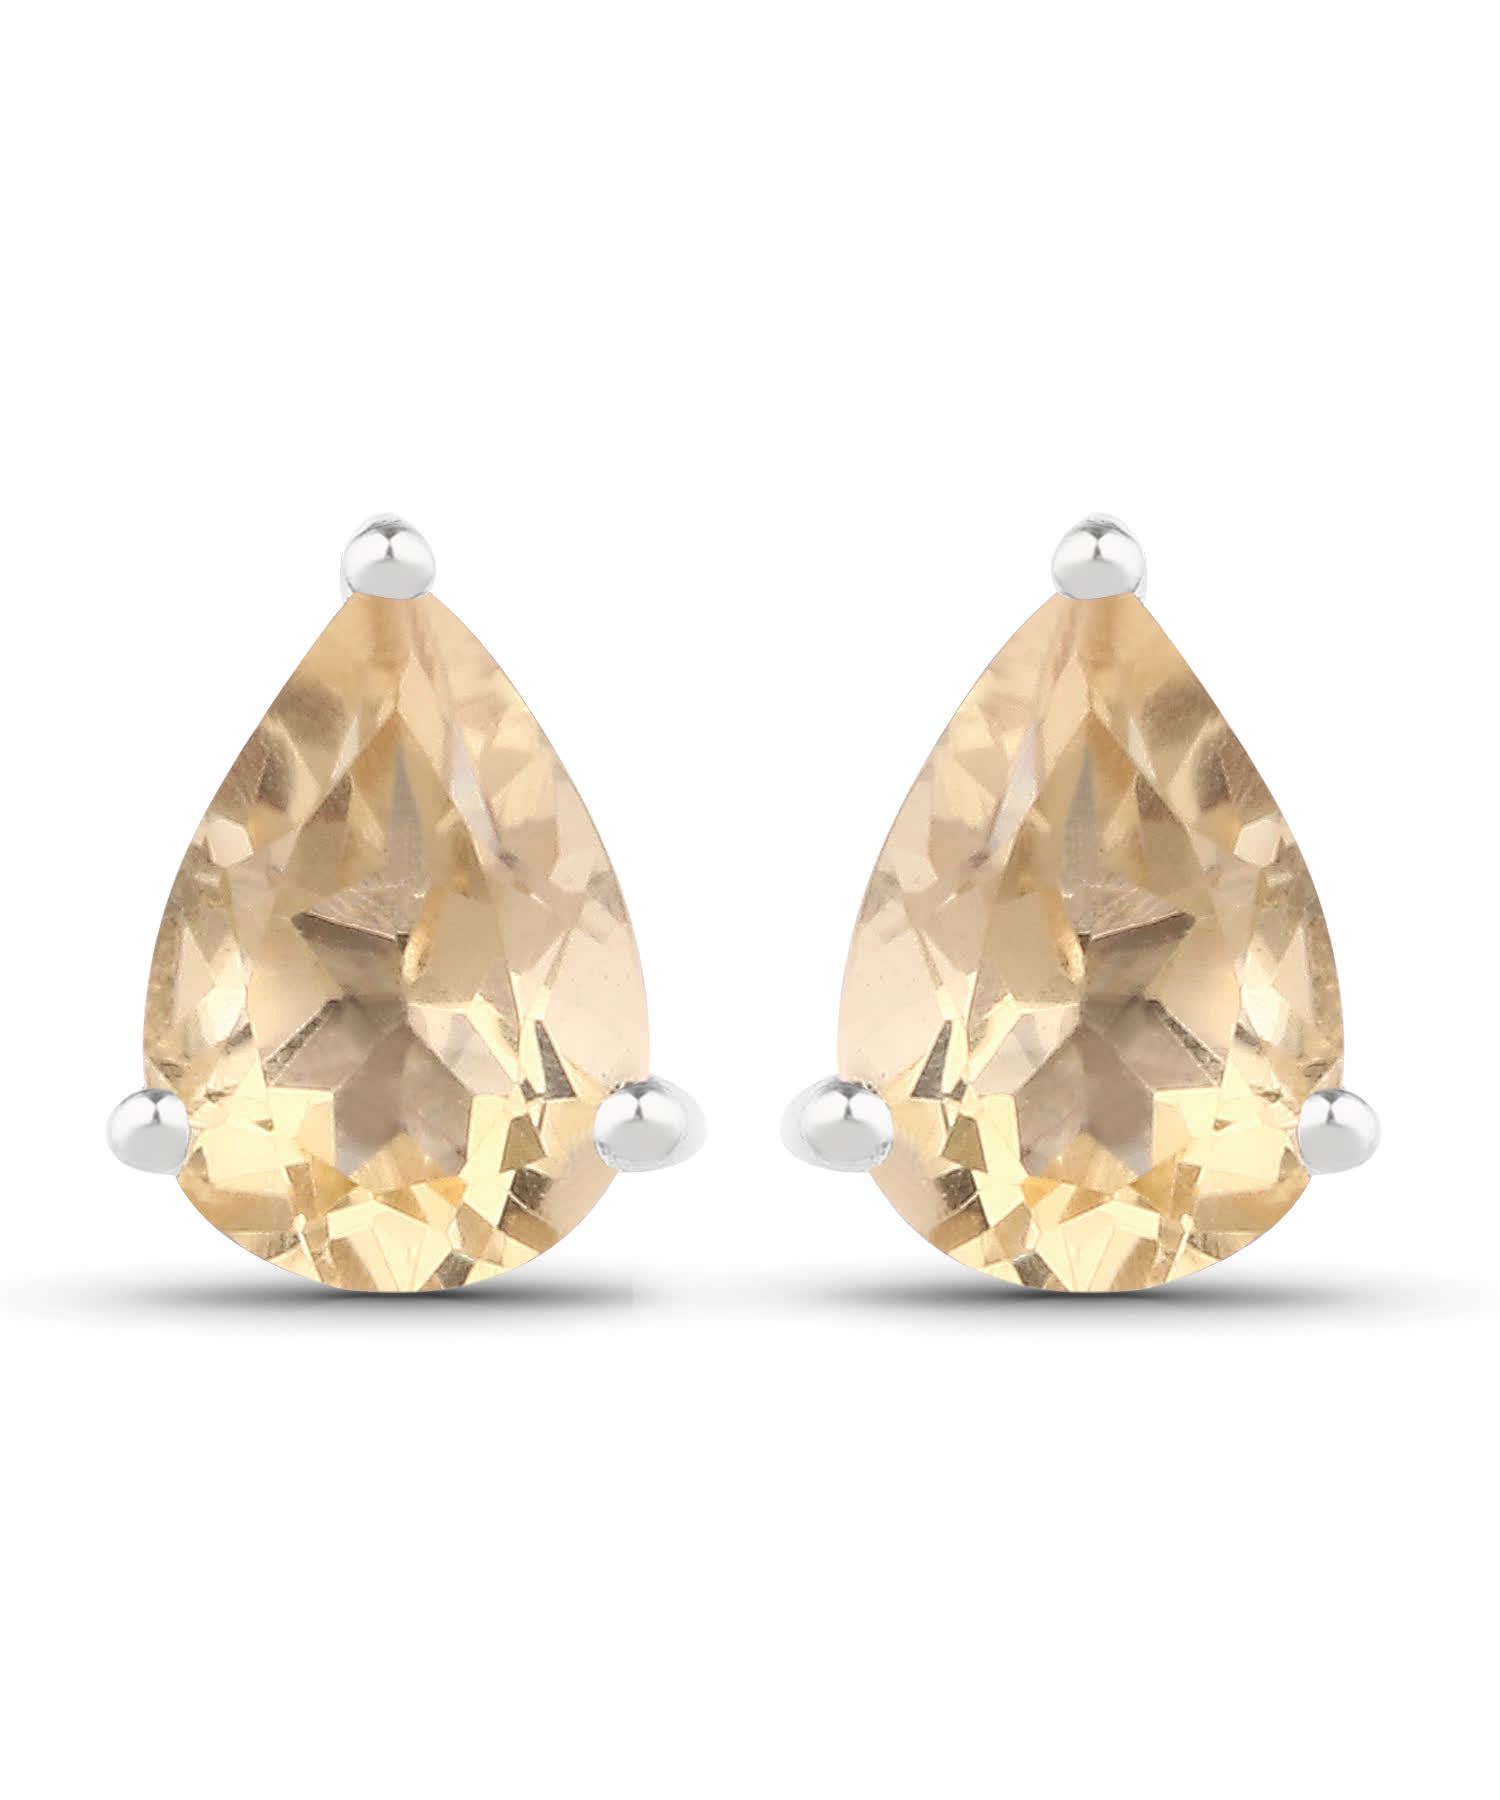 1.31ctw Natural Citrine Rhodium Plated 925 Sterling Silver Stud Earrings View 1